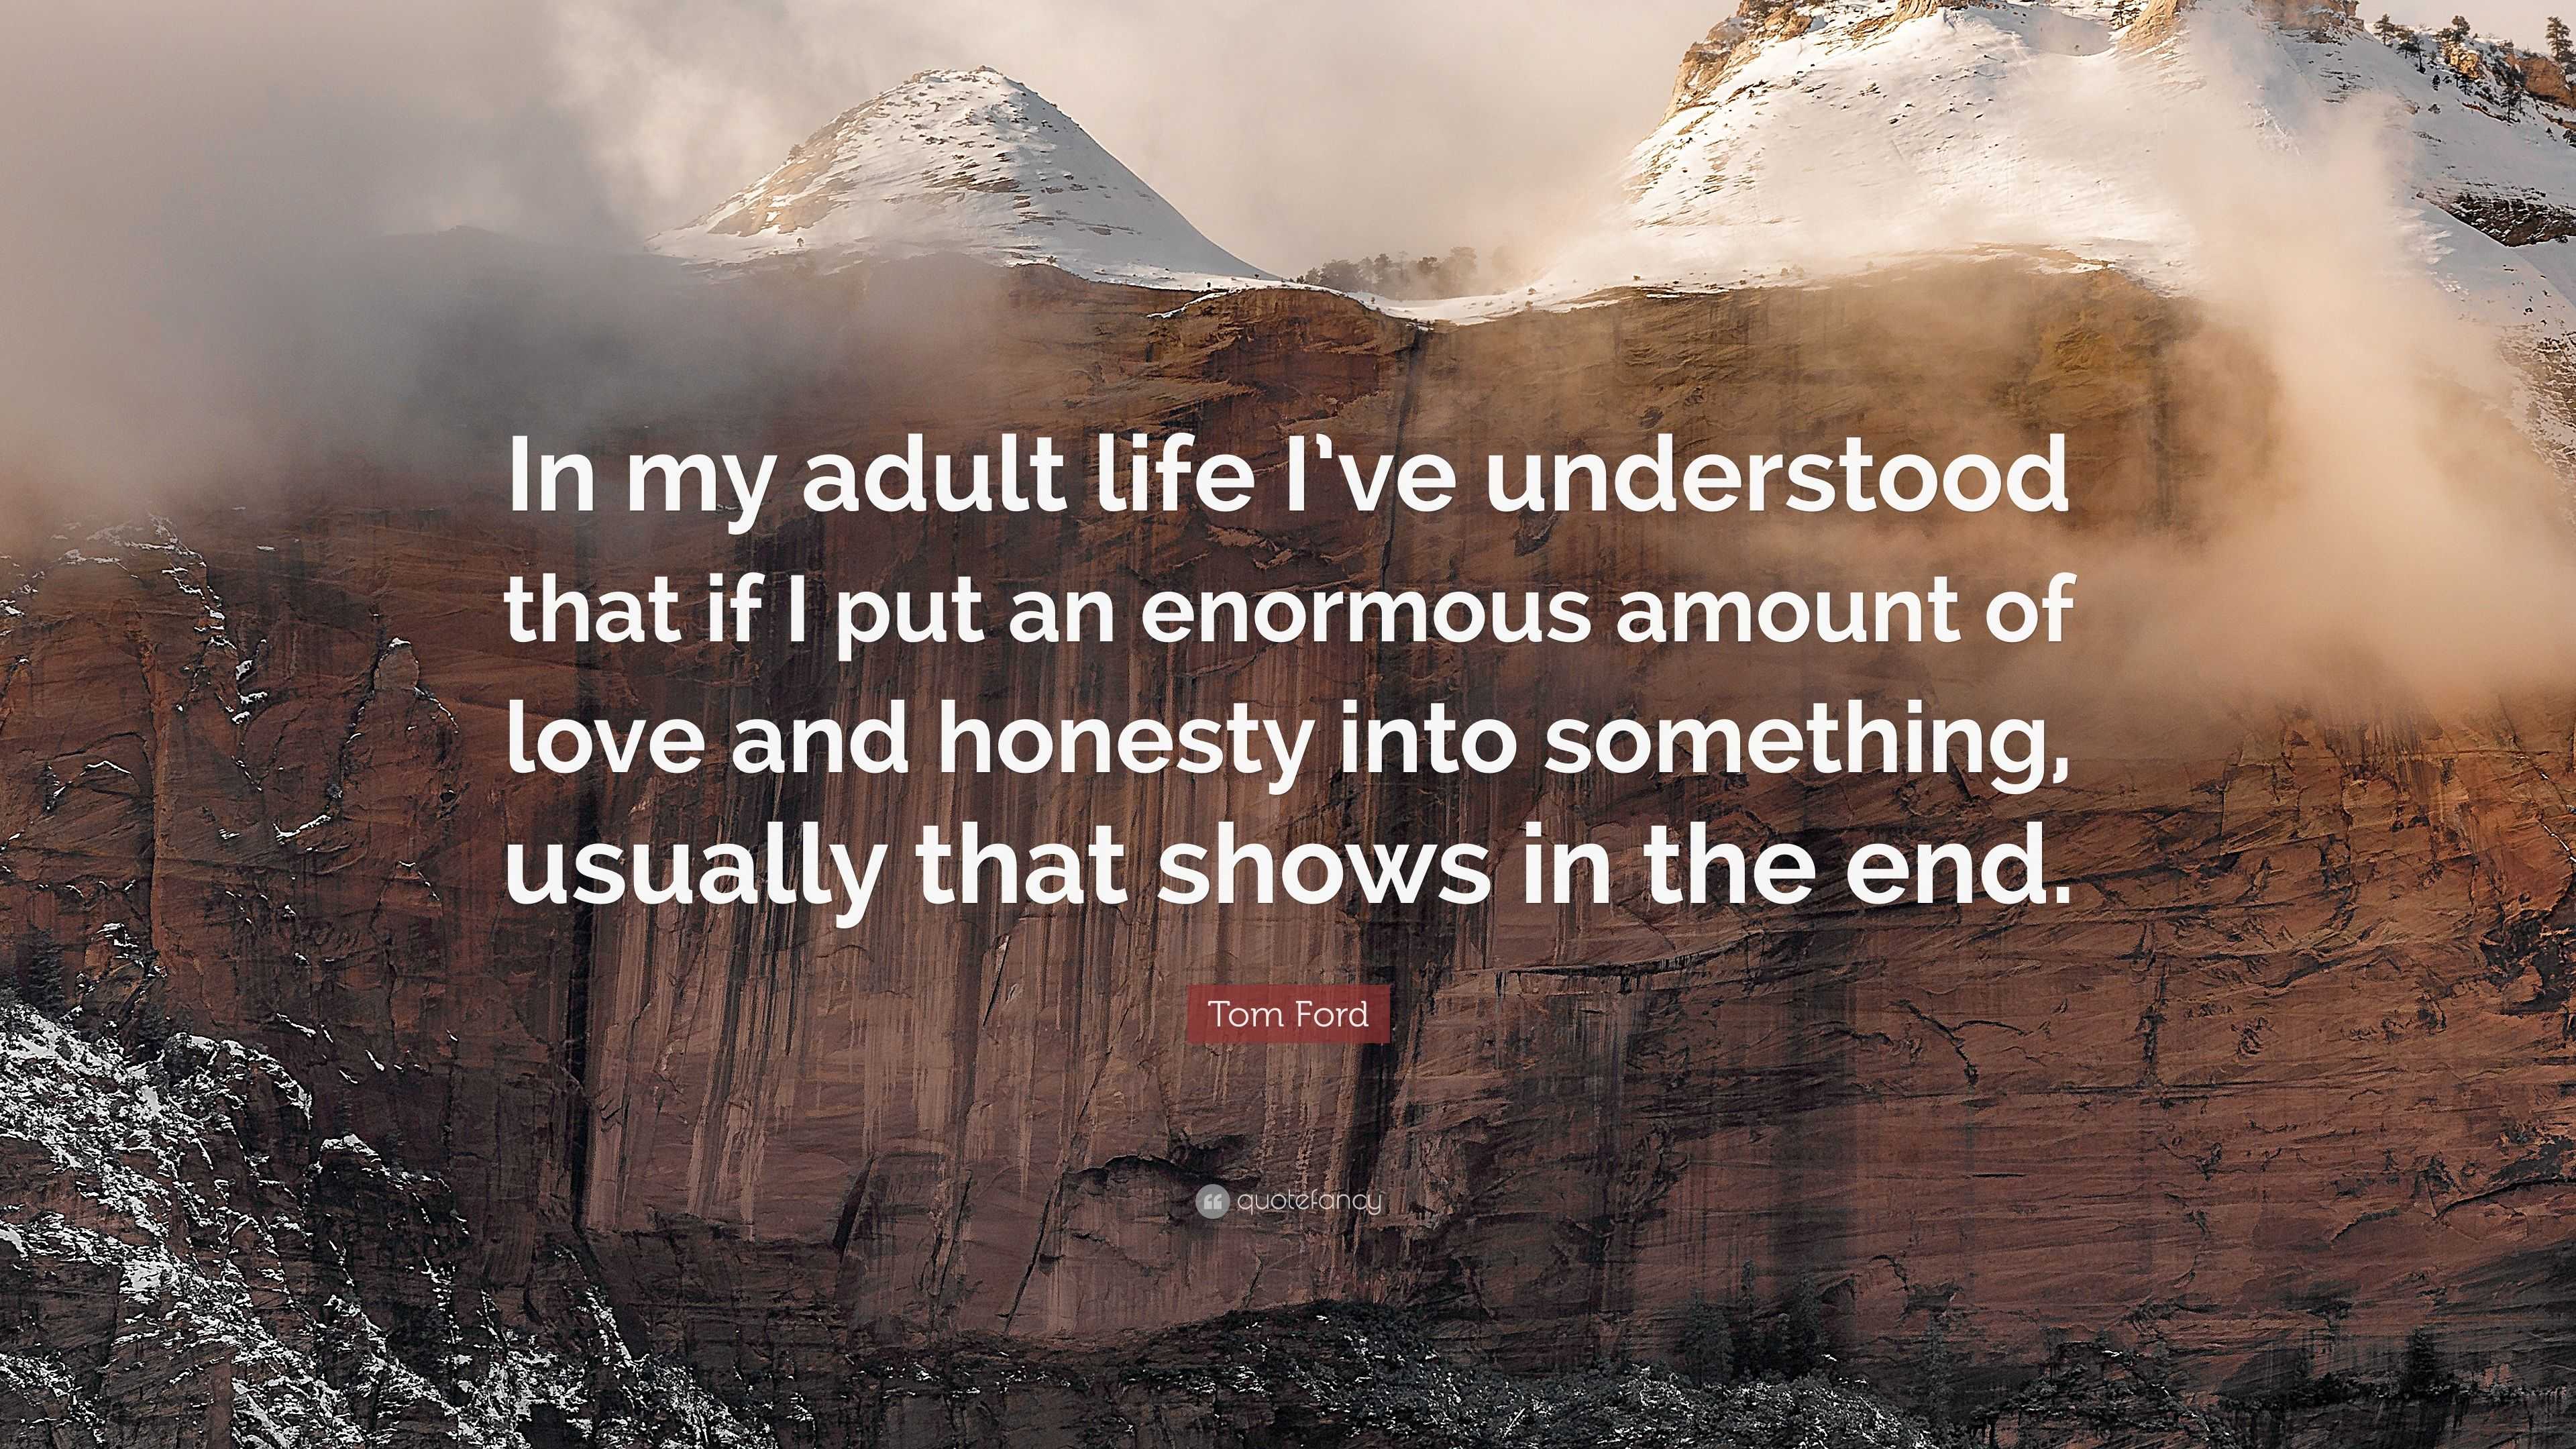 Tom Ford Quote: “In my adult life I've understood that if I put an enormous  amount of love and honesty into something, usually that shows...”